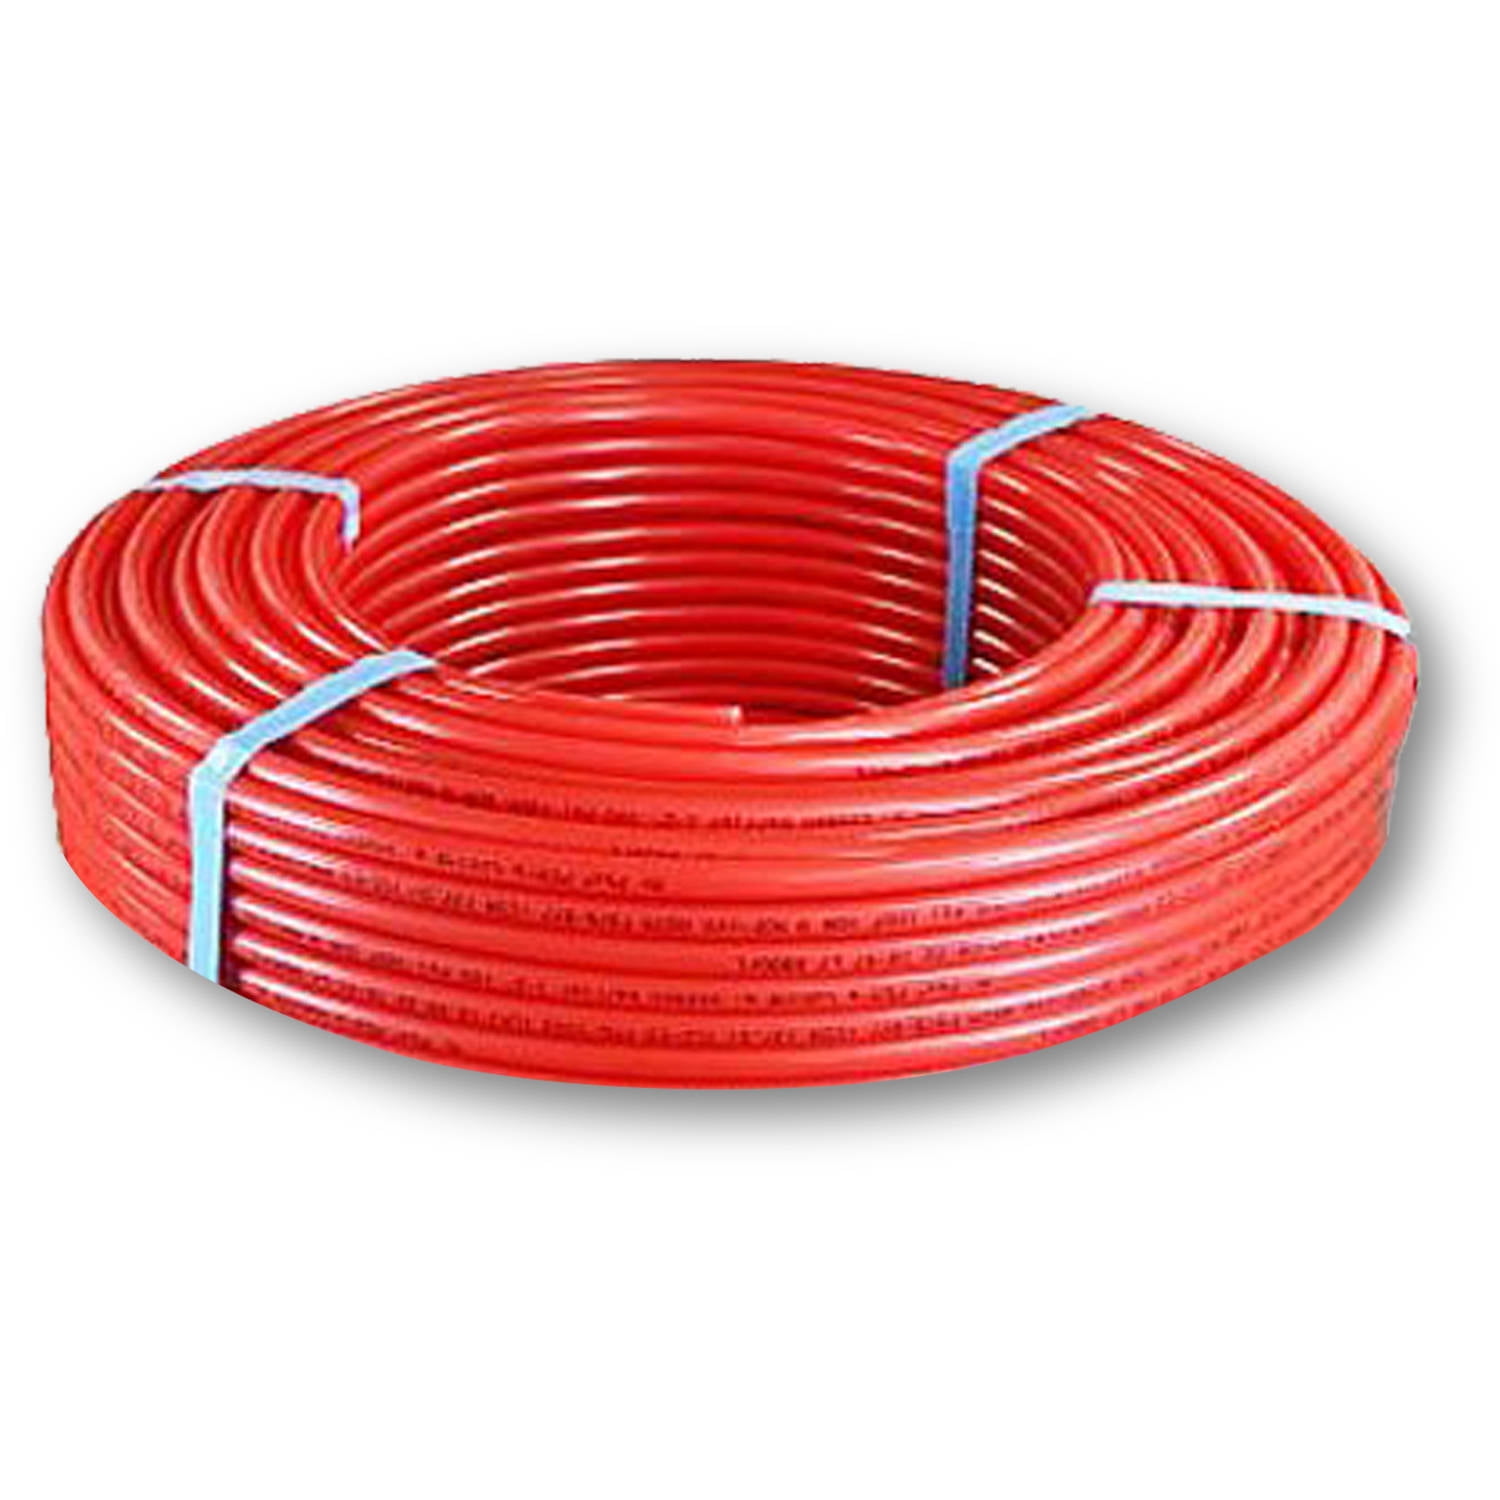 Pexflow PXKT-RB10034 PEX Potable Water Tubing  3/4 in X 100 ft 1 Red & Blue 